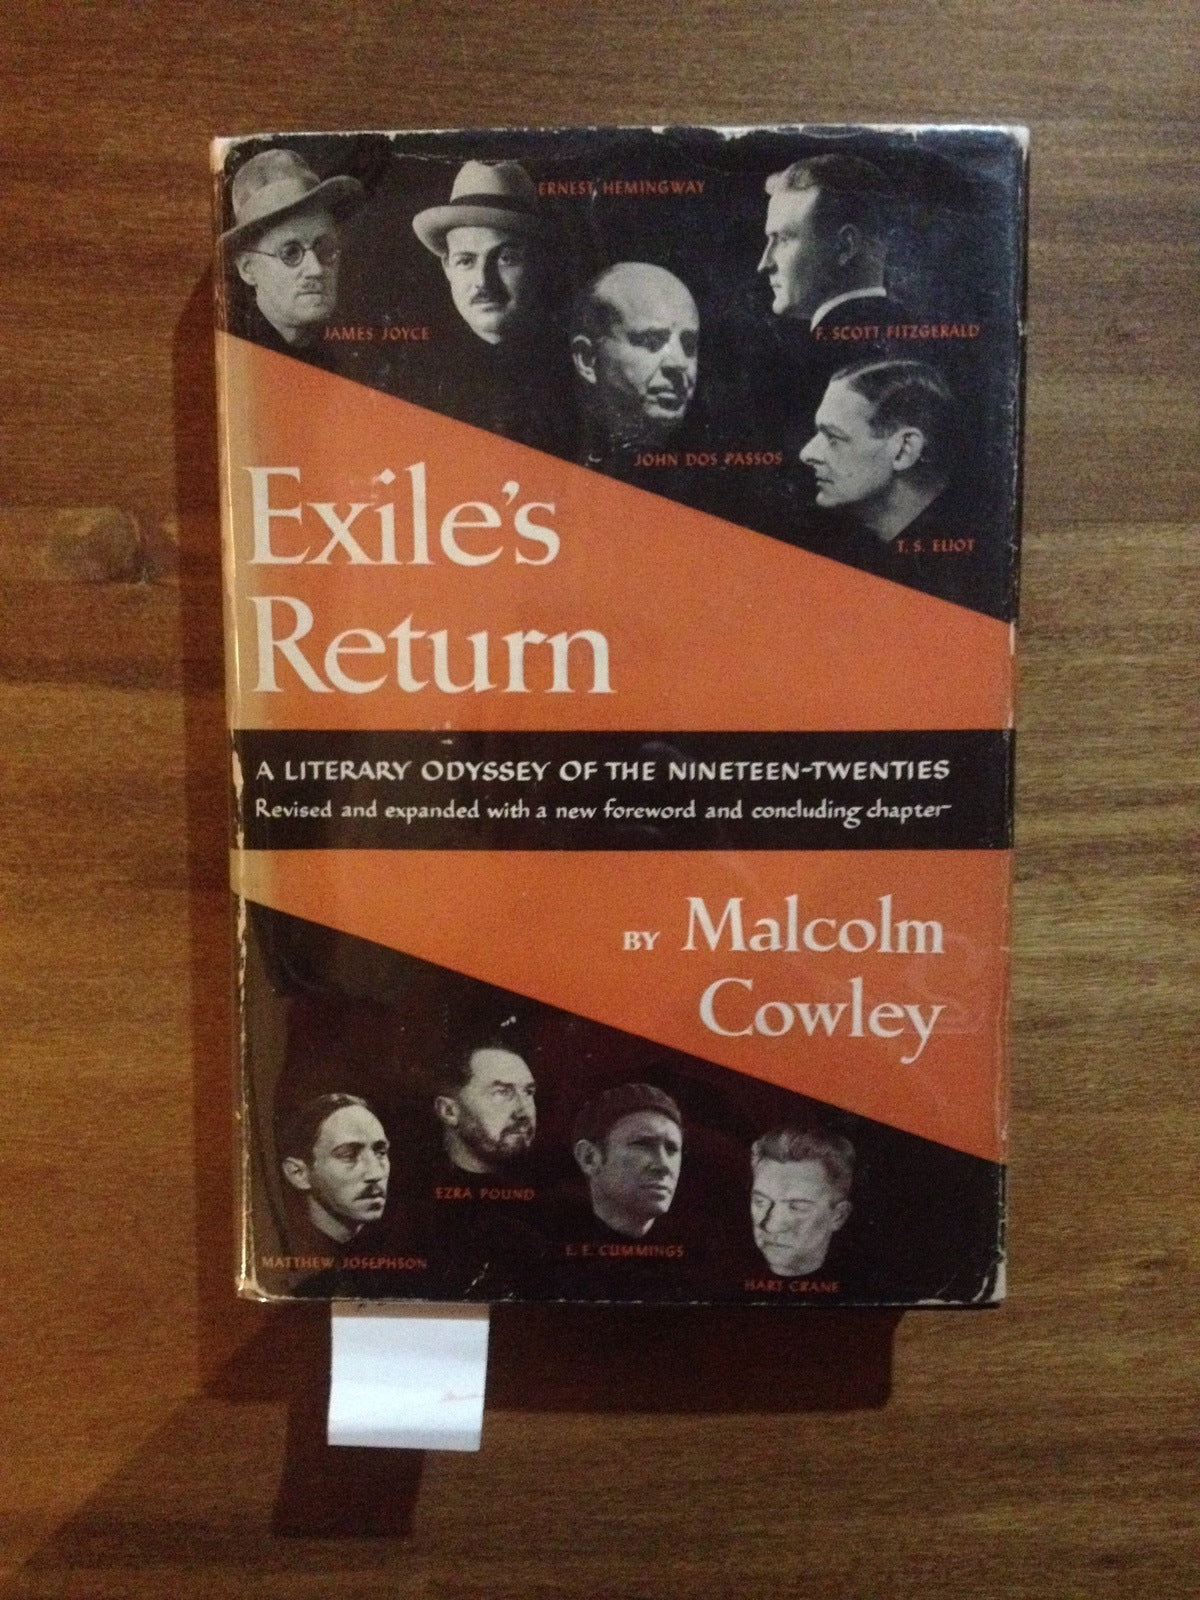 EXILE'S RETURN - LITERARY ODYSSEY OF 1920'S BY: MALCOLM COWLEY BooksCardsNBikes